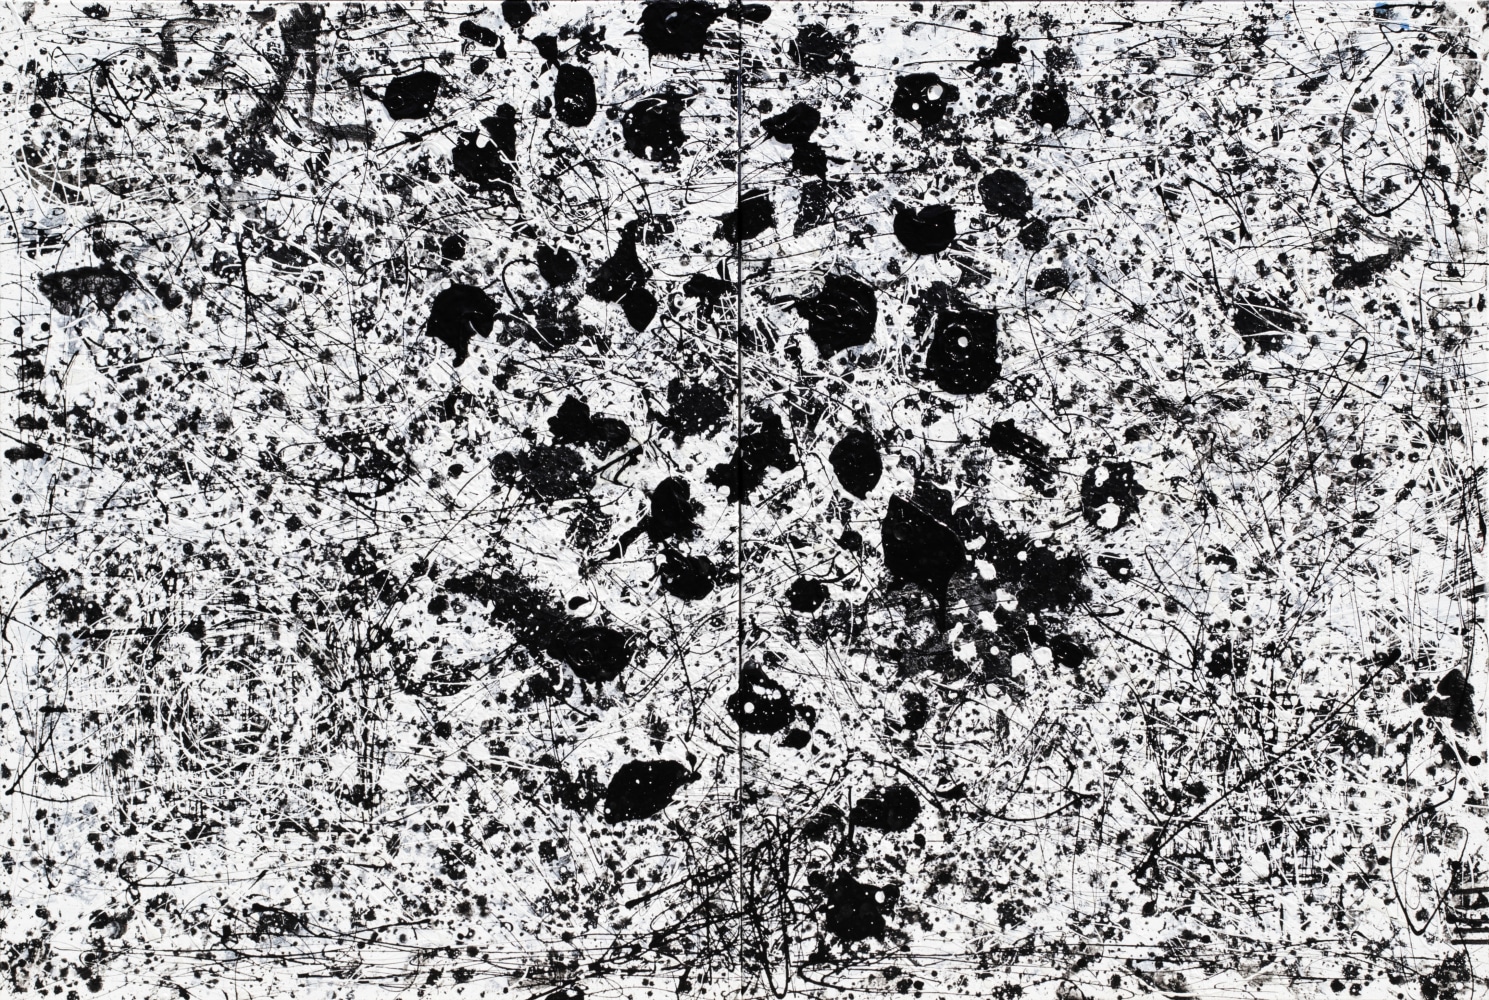 J. Steven Manolis, Black &amp; White (My Long March Journey), 2020, 48 x 72 inches, Acrylic and latex enamel on canvas, Abstract Expressionism paintings for sale at Manolis Projects Art Gallery, Miami, Fl